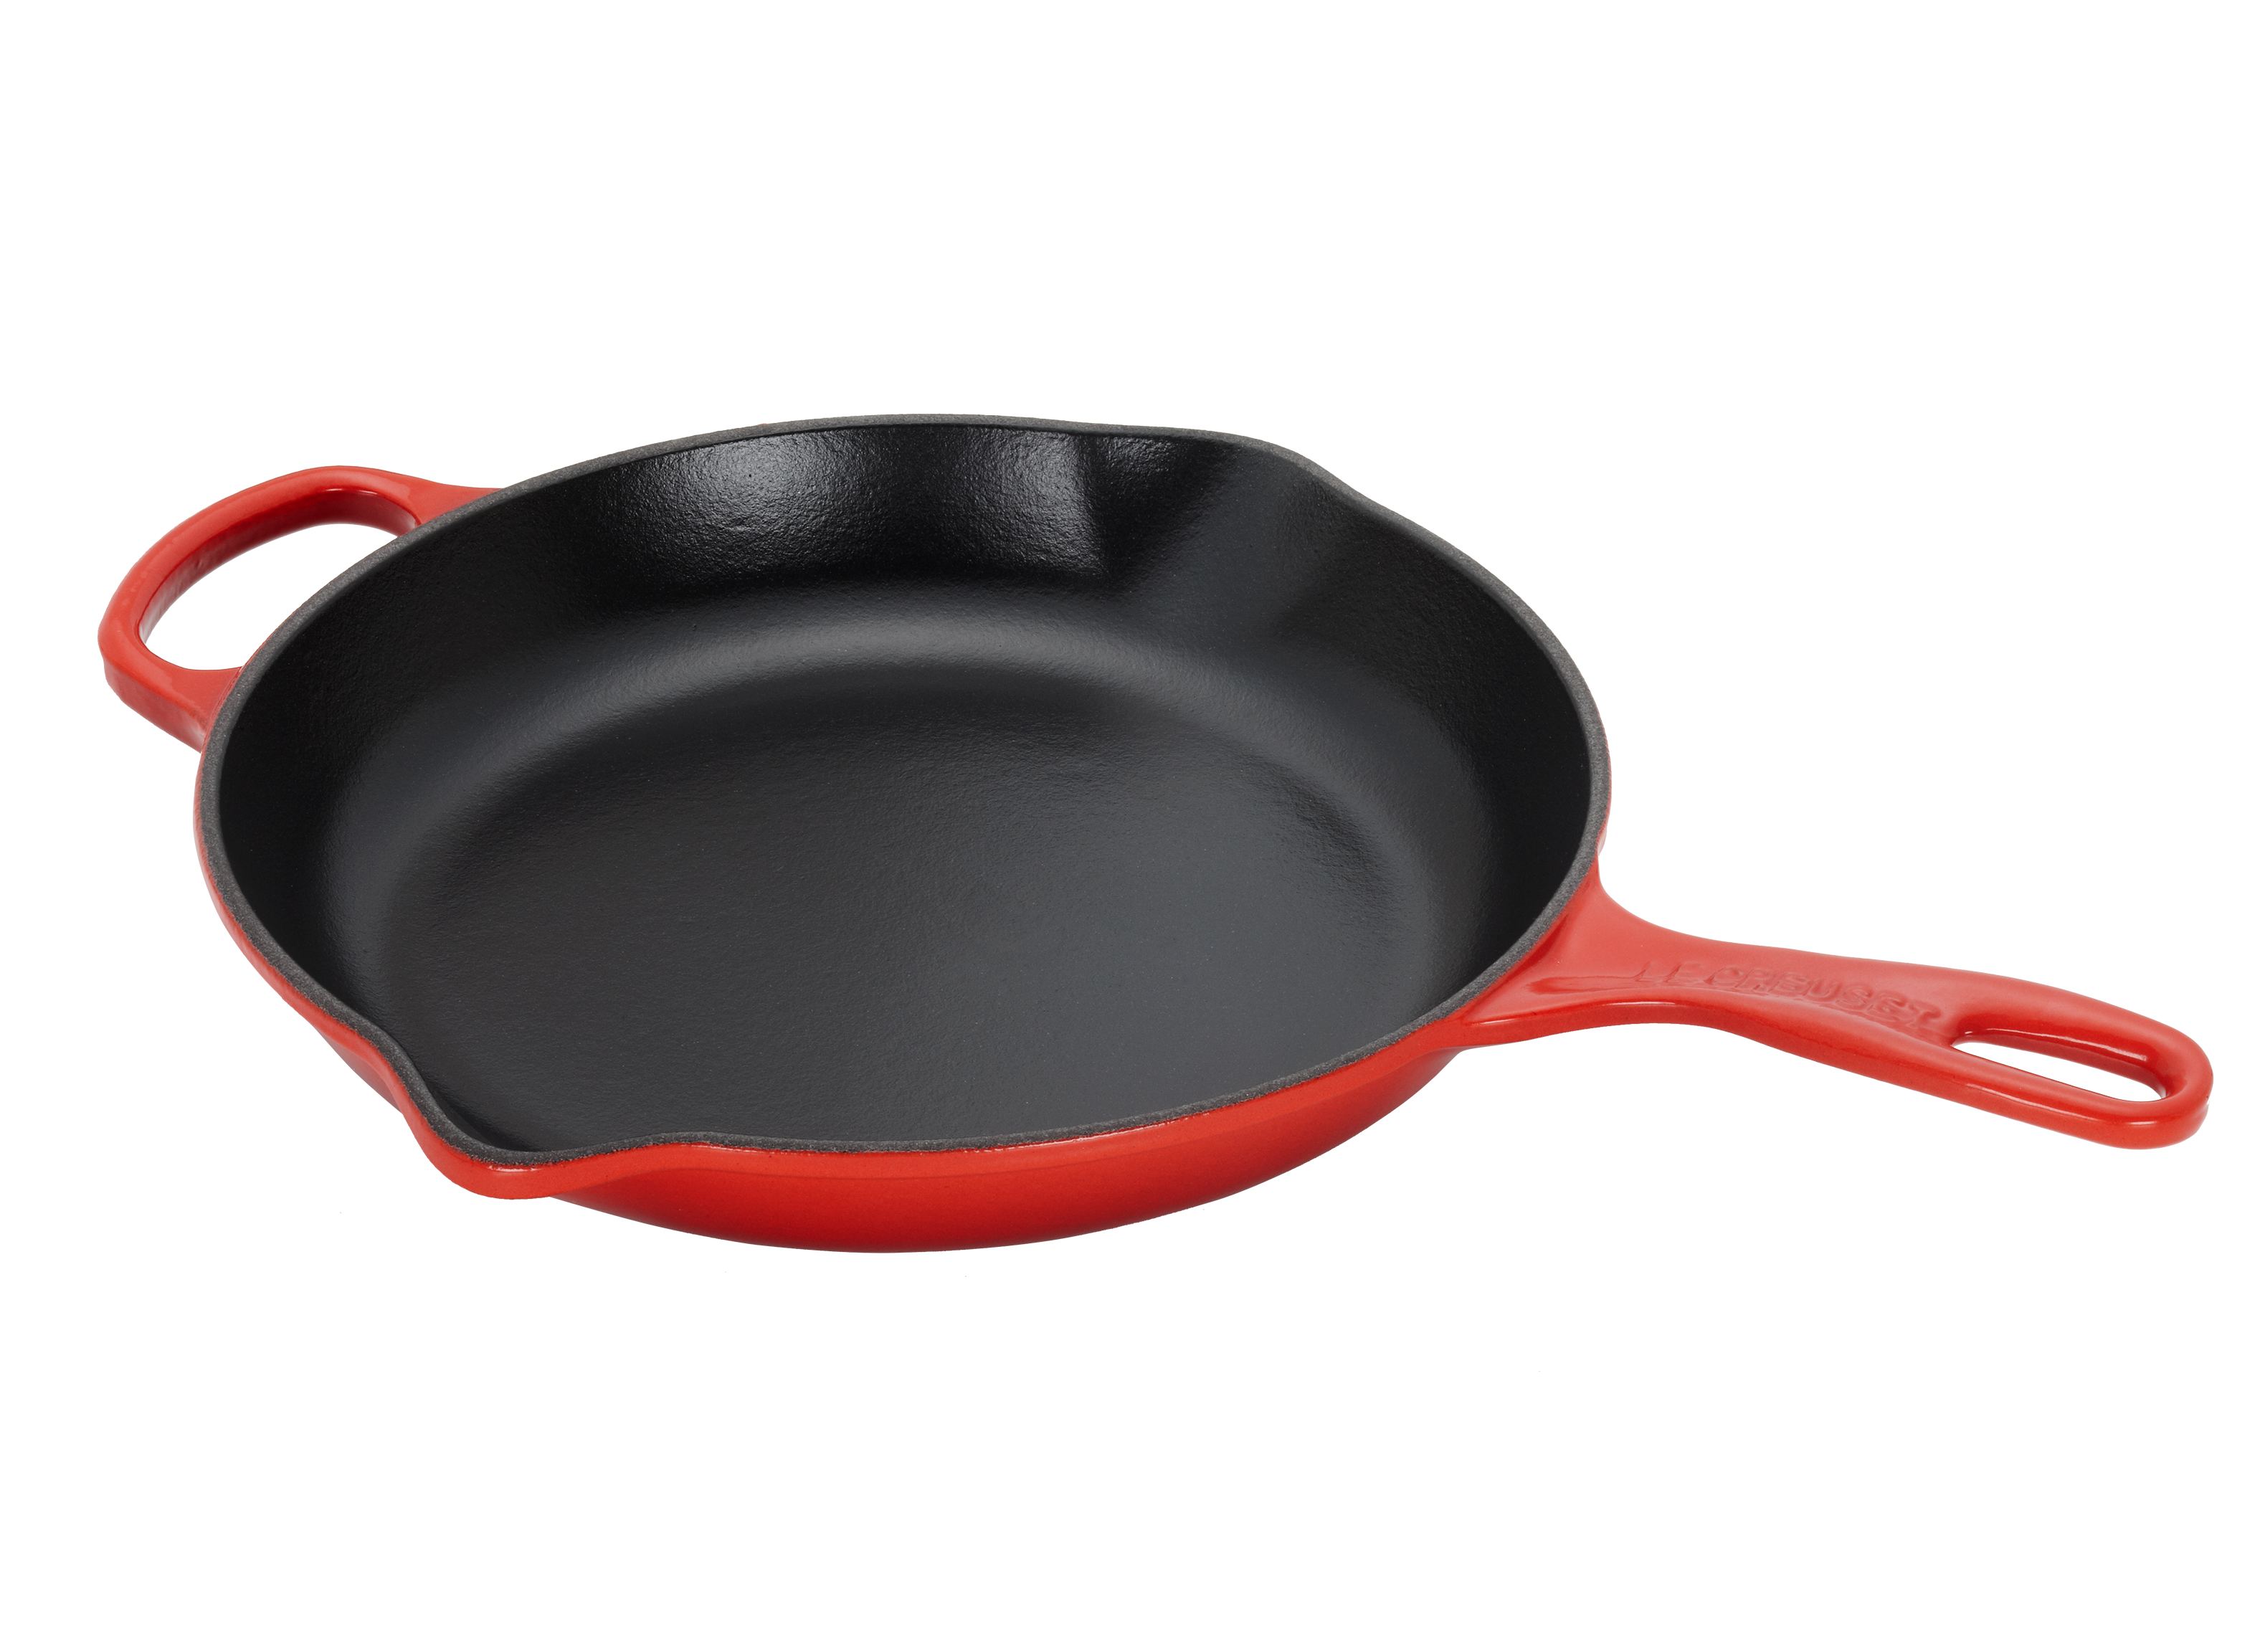 https://crdms.images.consumerreports.org/prod/products/cr/models/400504-coated-cast-iron-le-creuset-signature-10017058.png